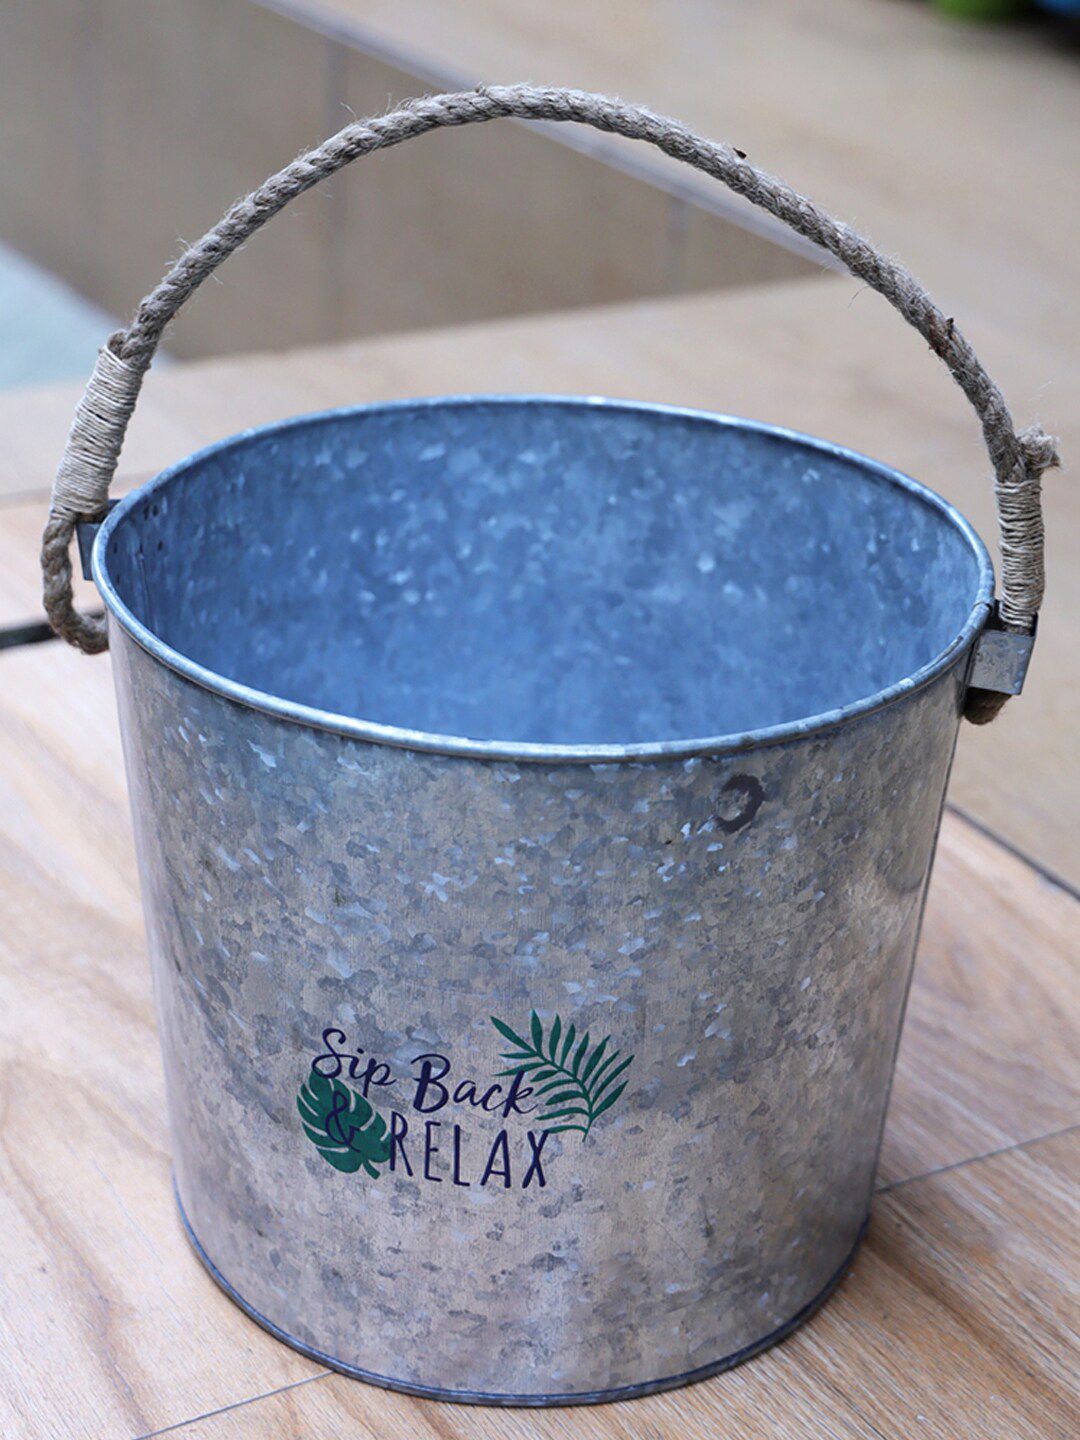 A Vintage Affair- Home Decor Silver-Toned & Blue Relax Rustic Storage Bucket Price in India